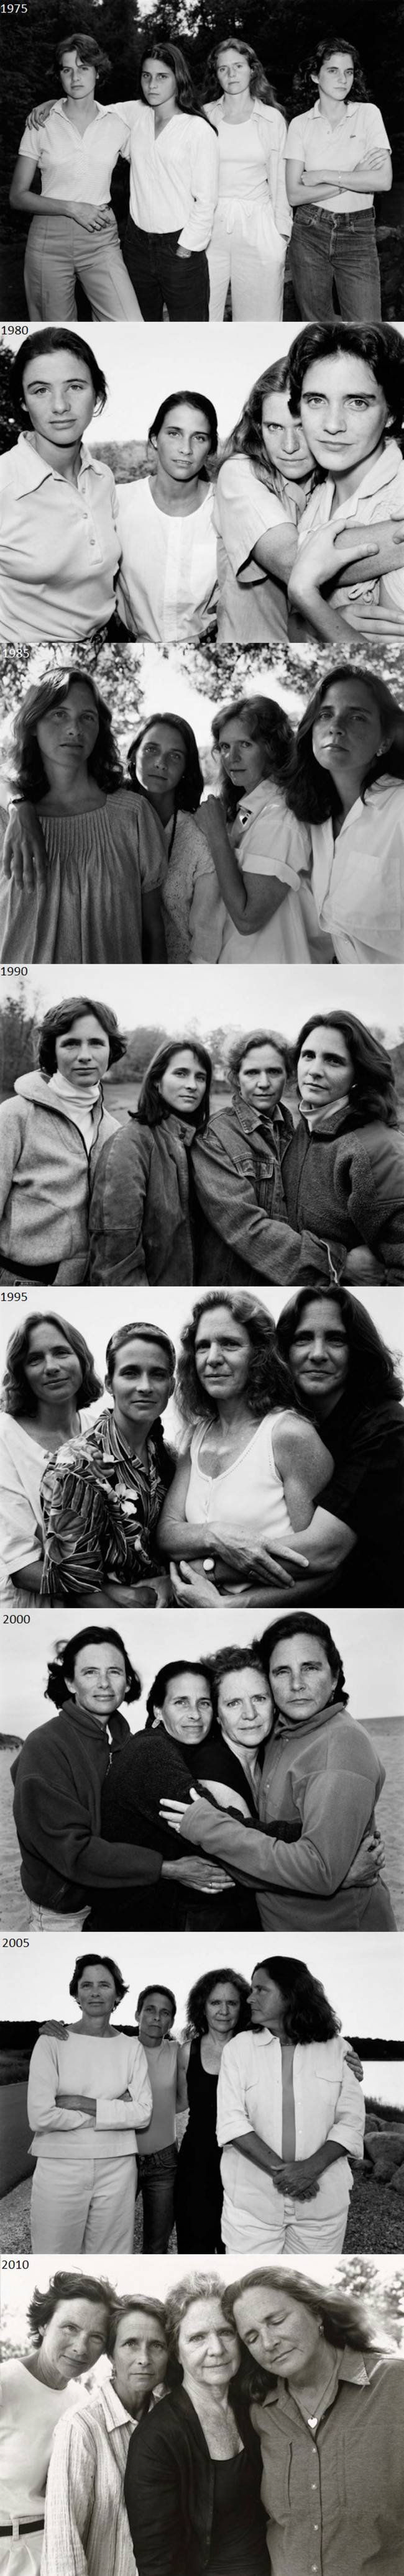 15. Sisters, every year since 1975.